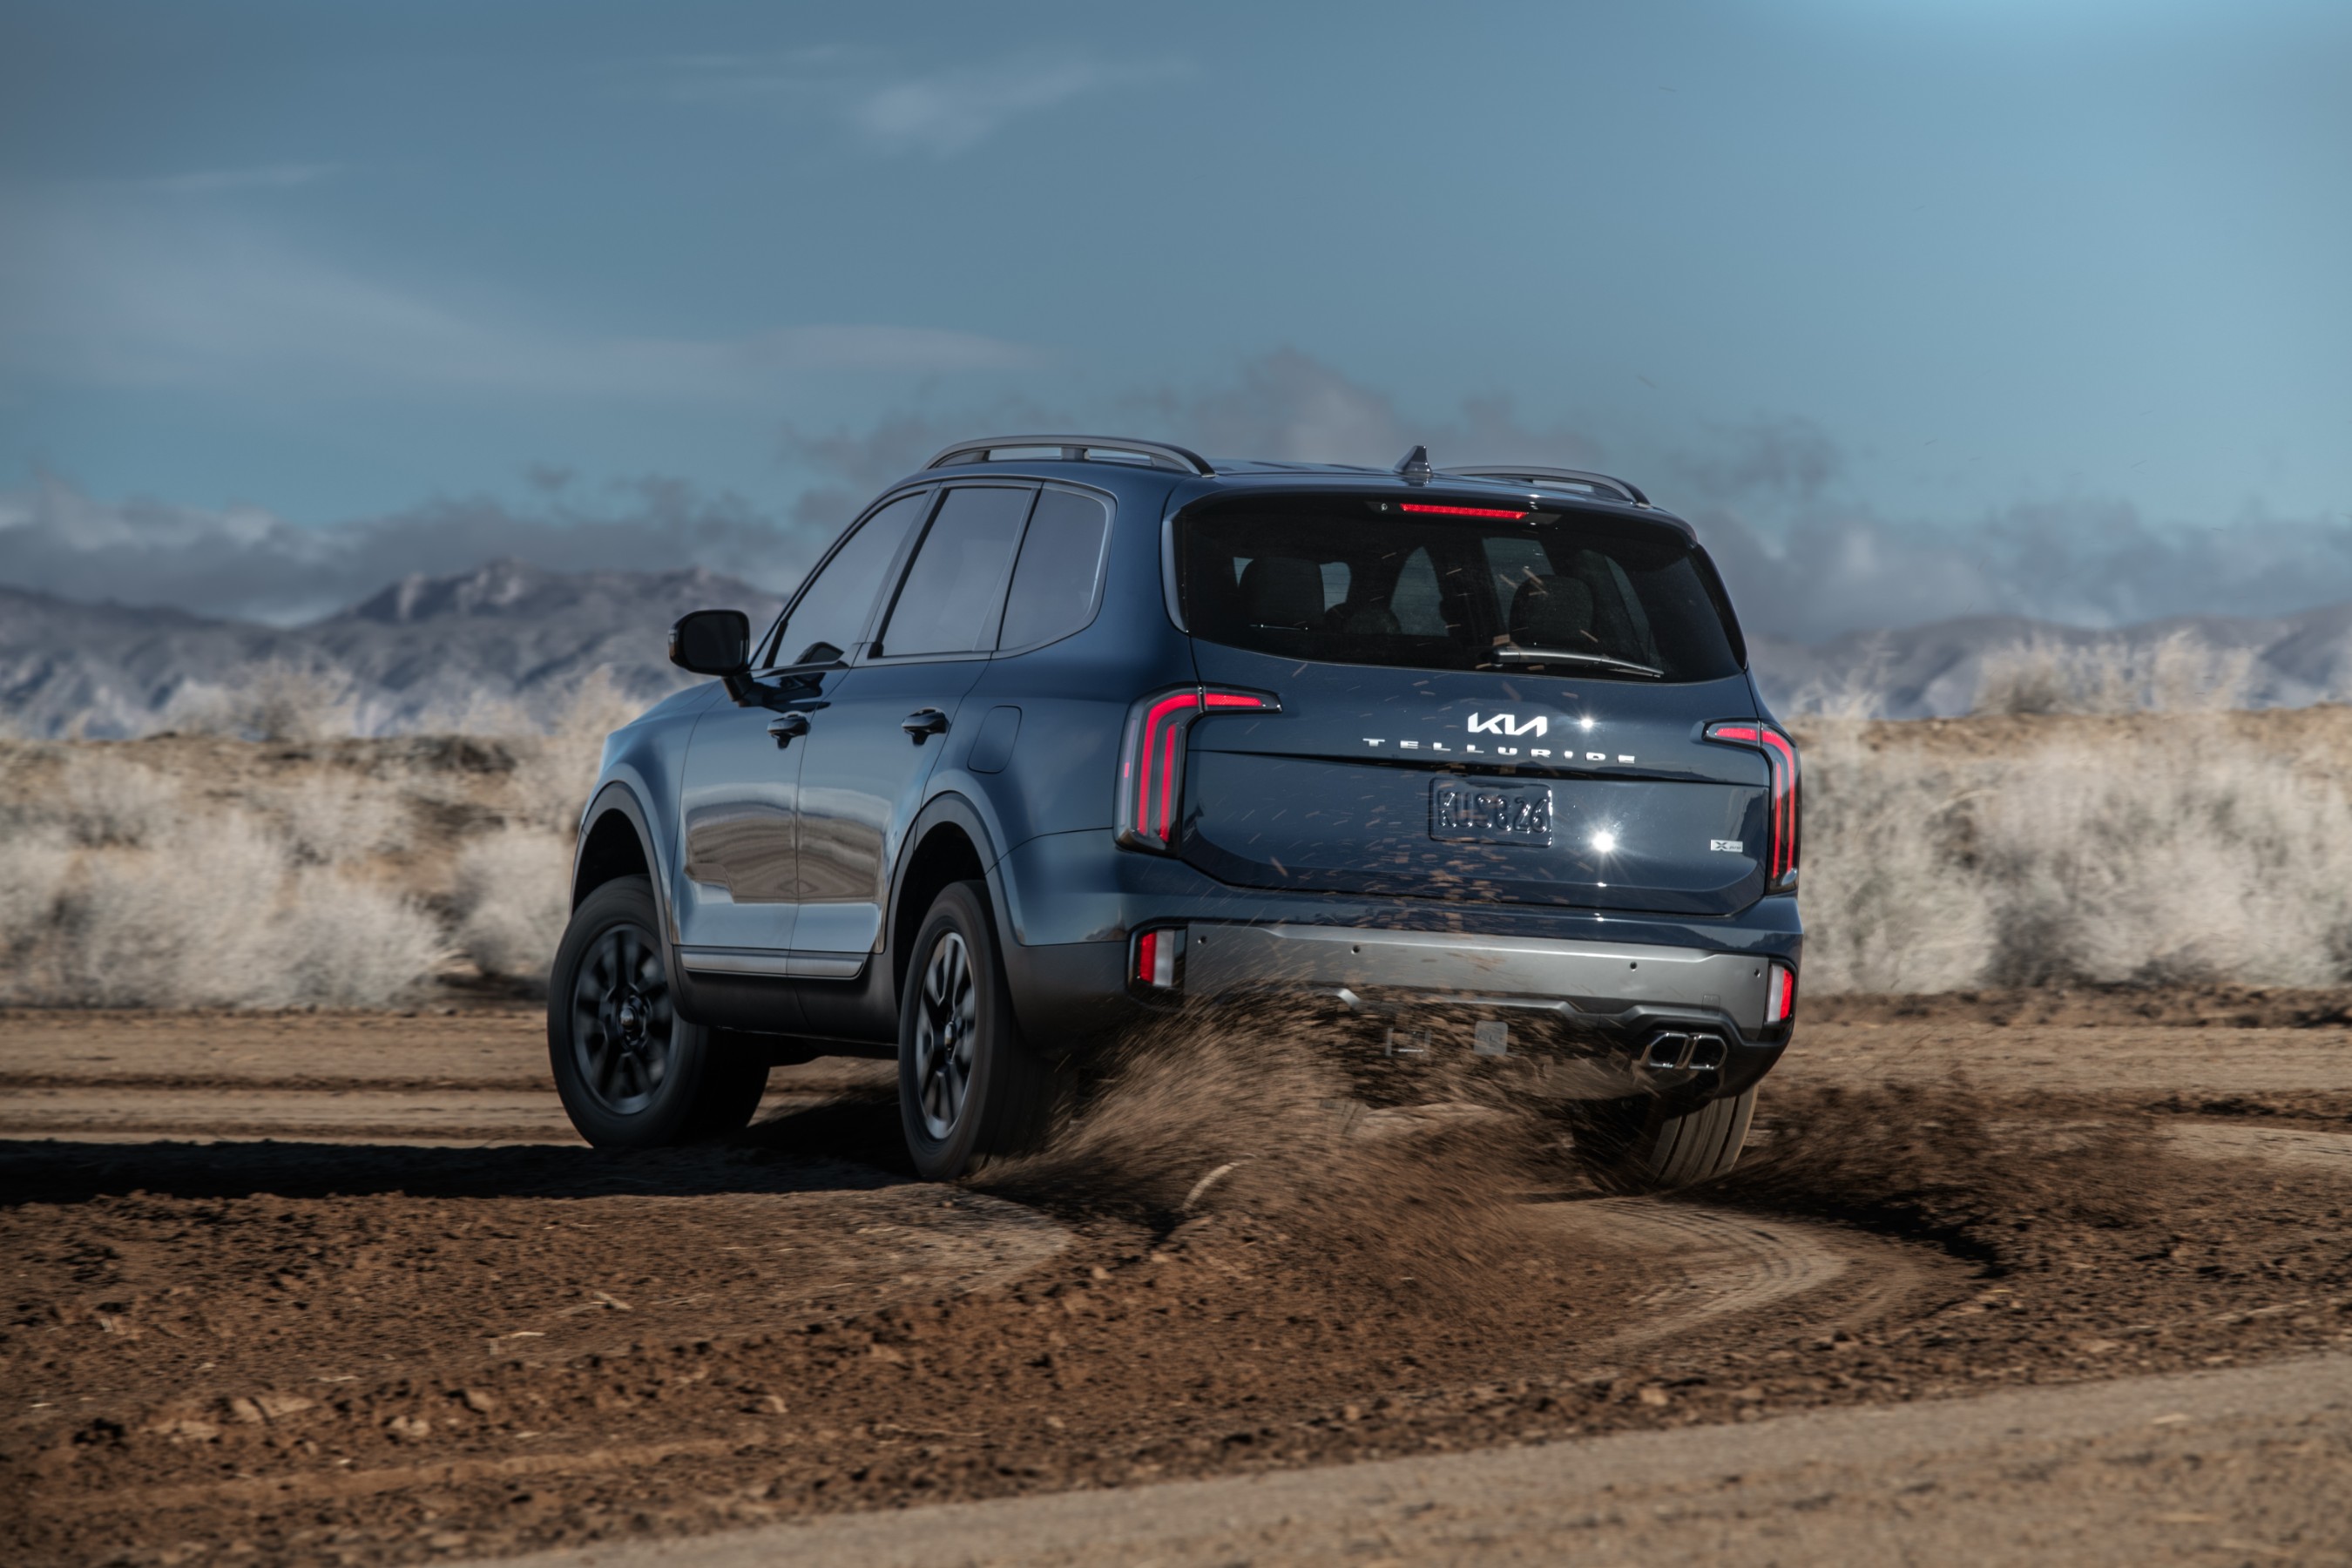 The new 2023 Telluride, Kia’s flagship SUV, introduces X-Line and X-Pro models with added ruggedness and capability for adventures in the wild.